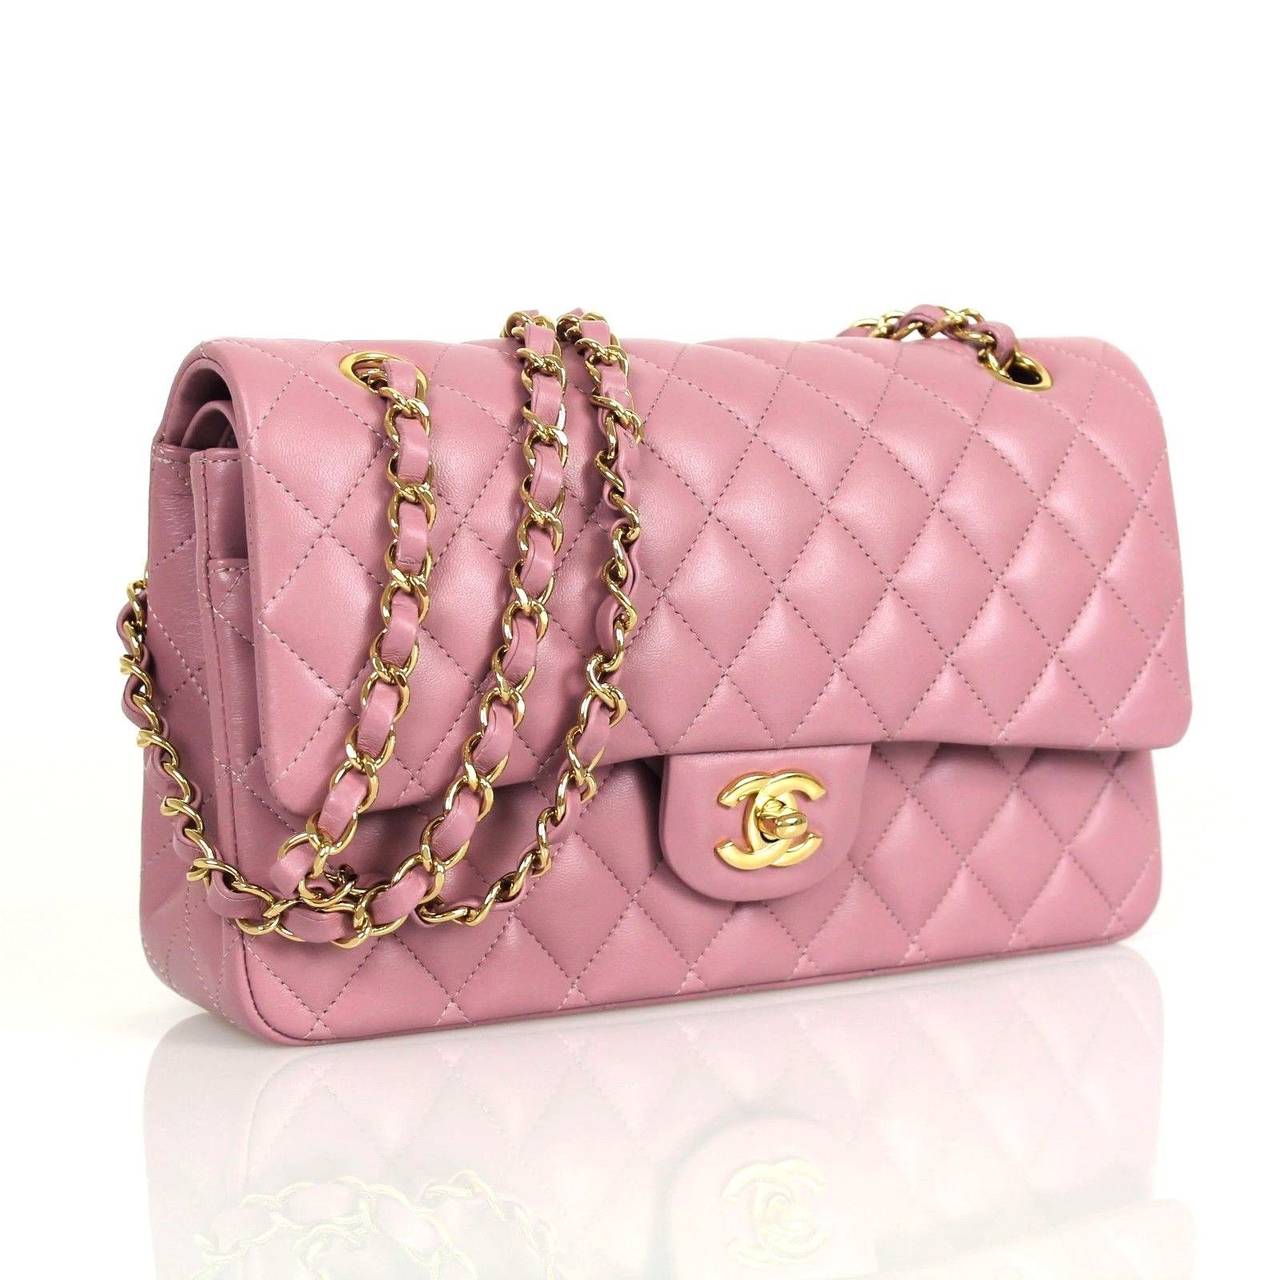 This authentic Chanel Jumbo Classic in lilac lambskin leather is unworn. Like all the new jumbo classics, this is a double flap style.Durable glorious lilac lambskin leather is quilted in signature Chanel diamond stitched pattern. Complimentary gol